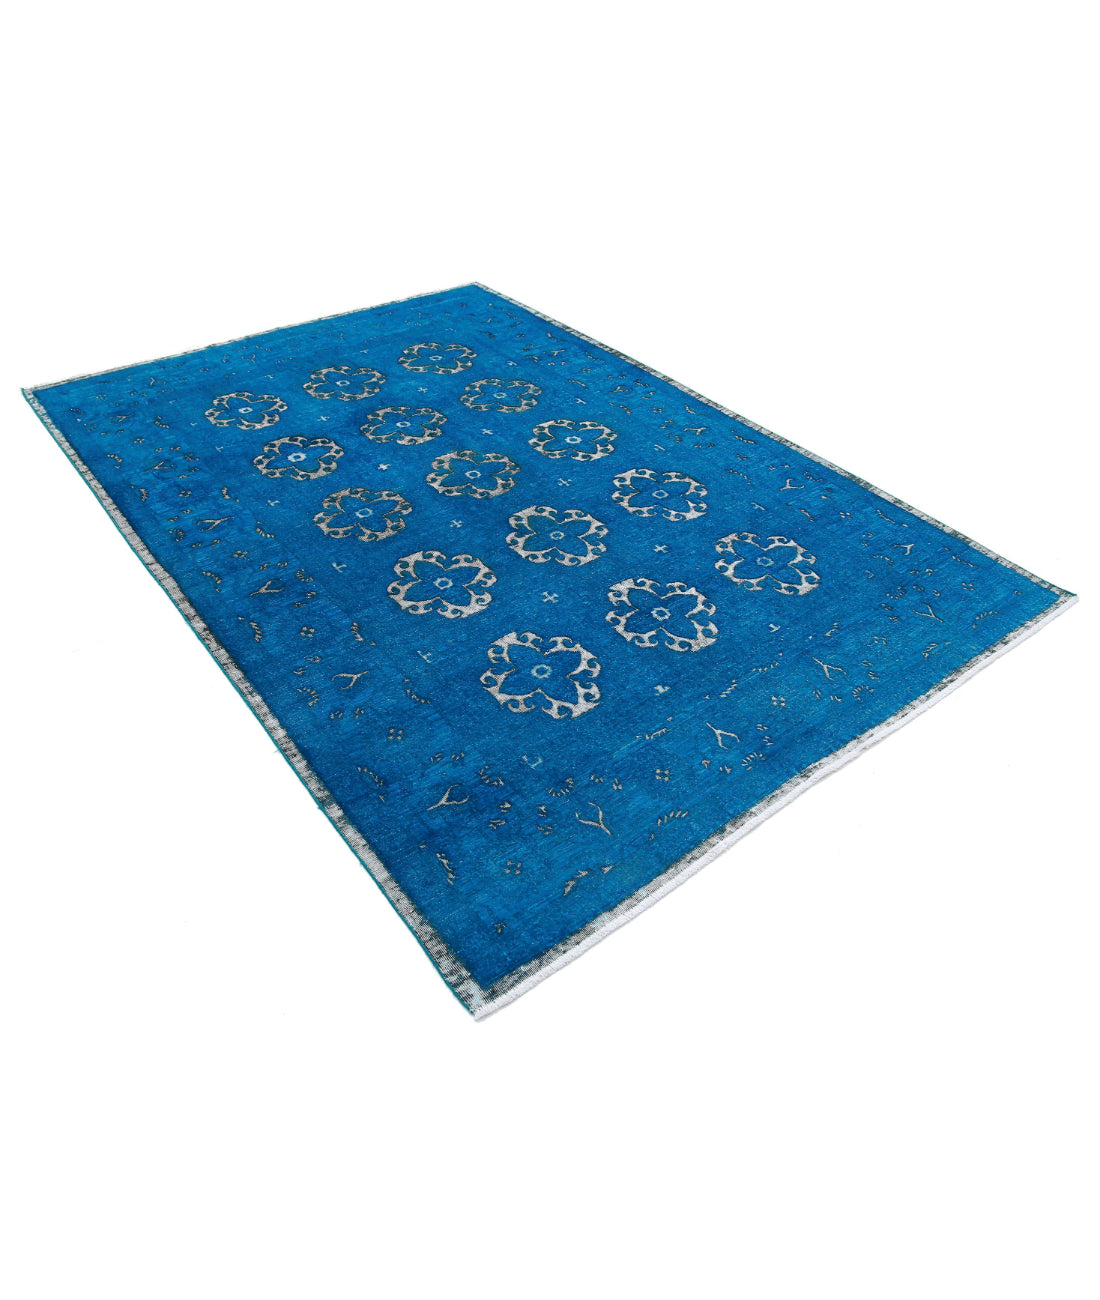 Hand Knotted Onyx Wool Rug - 6'2'' x 8'8'' 6'2'' x 8'8'' (185 X 260) / Teal / Teal